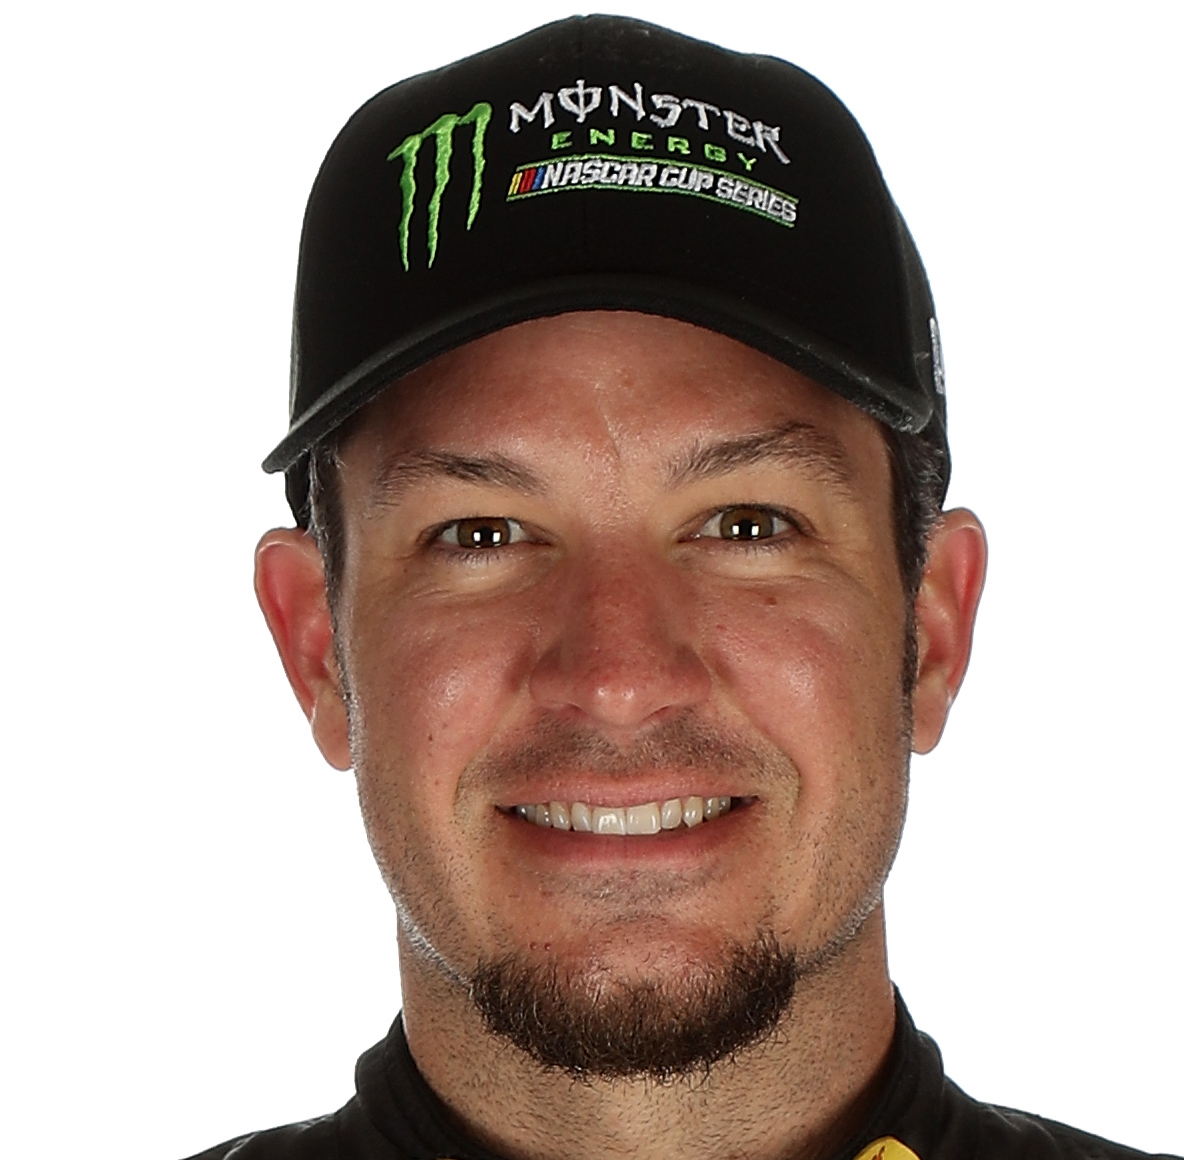 There was no competition this year for our pick of DOY, Truex Jr. and his small Furniture Row team based in Denver slayed the super teams based in the Charlotte area